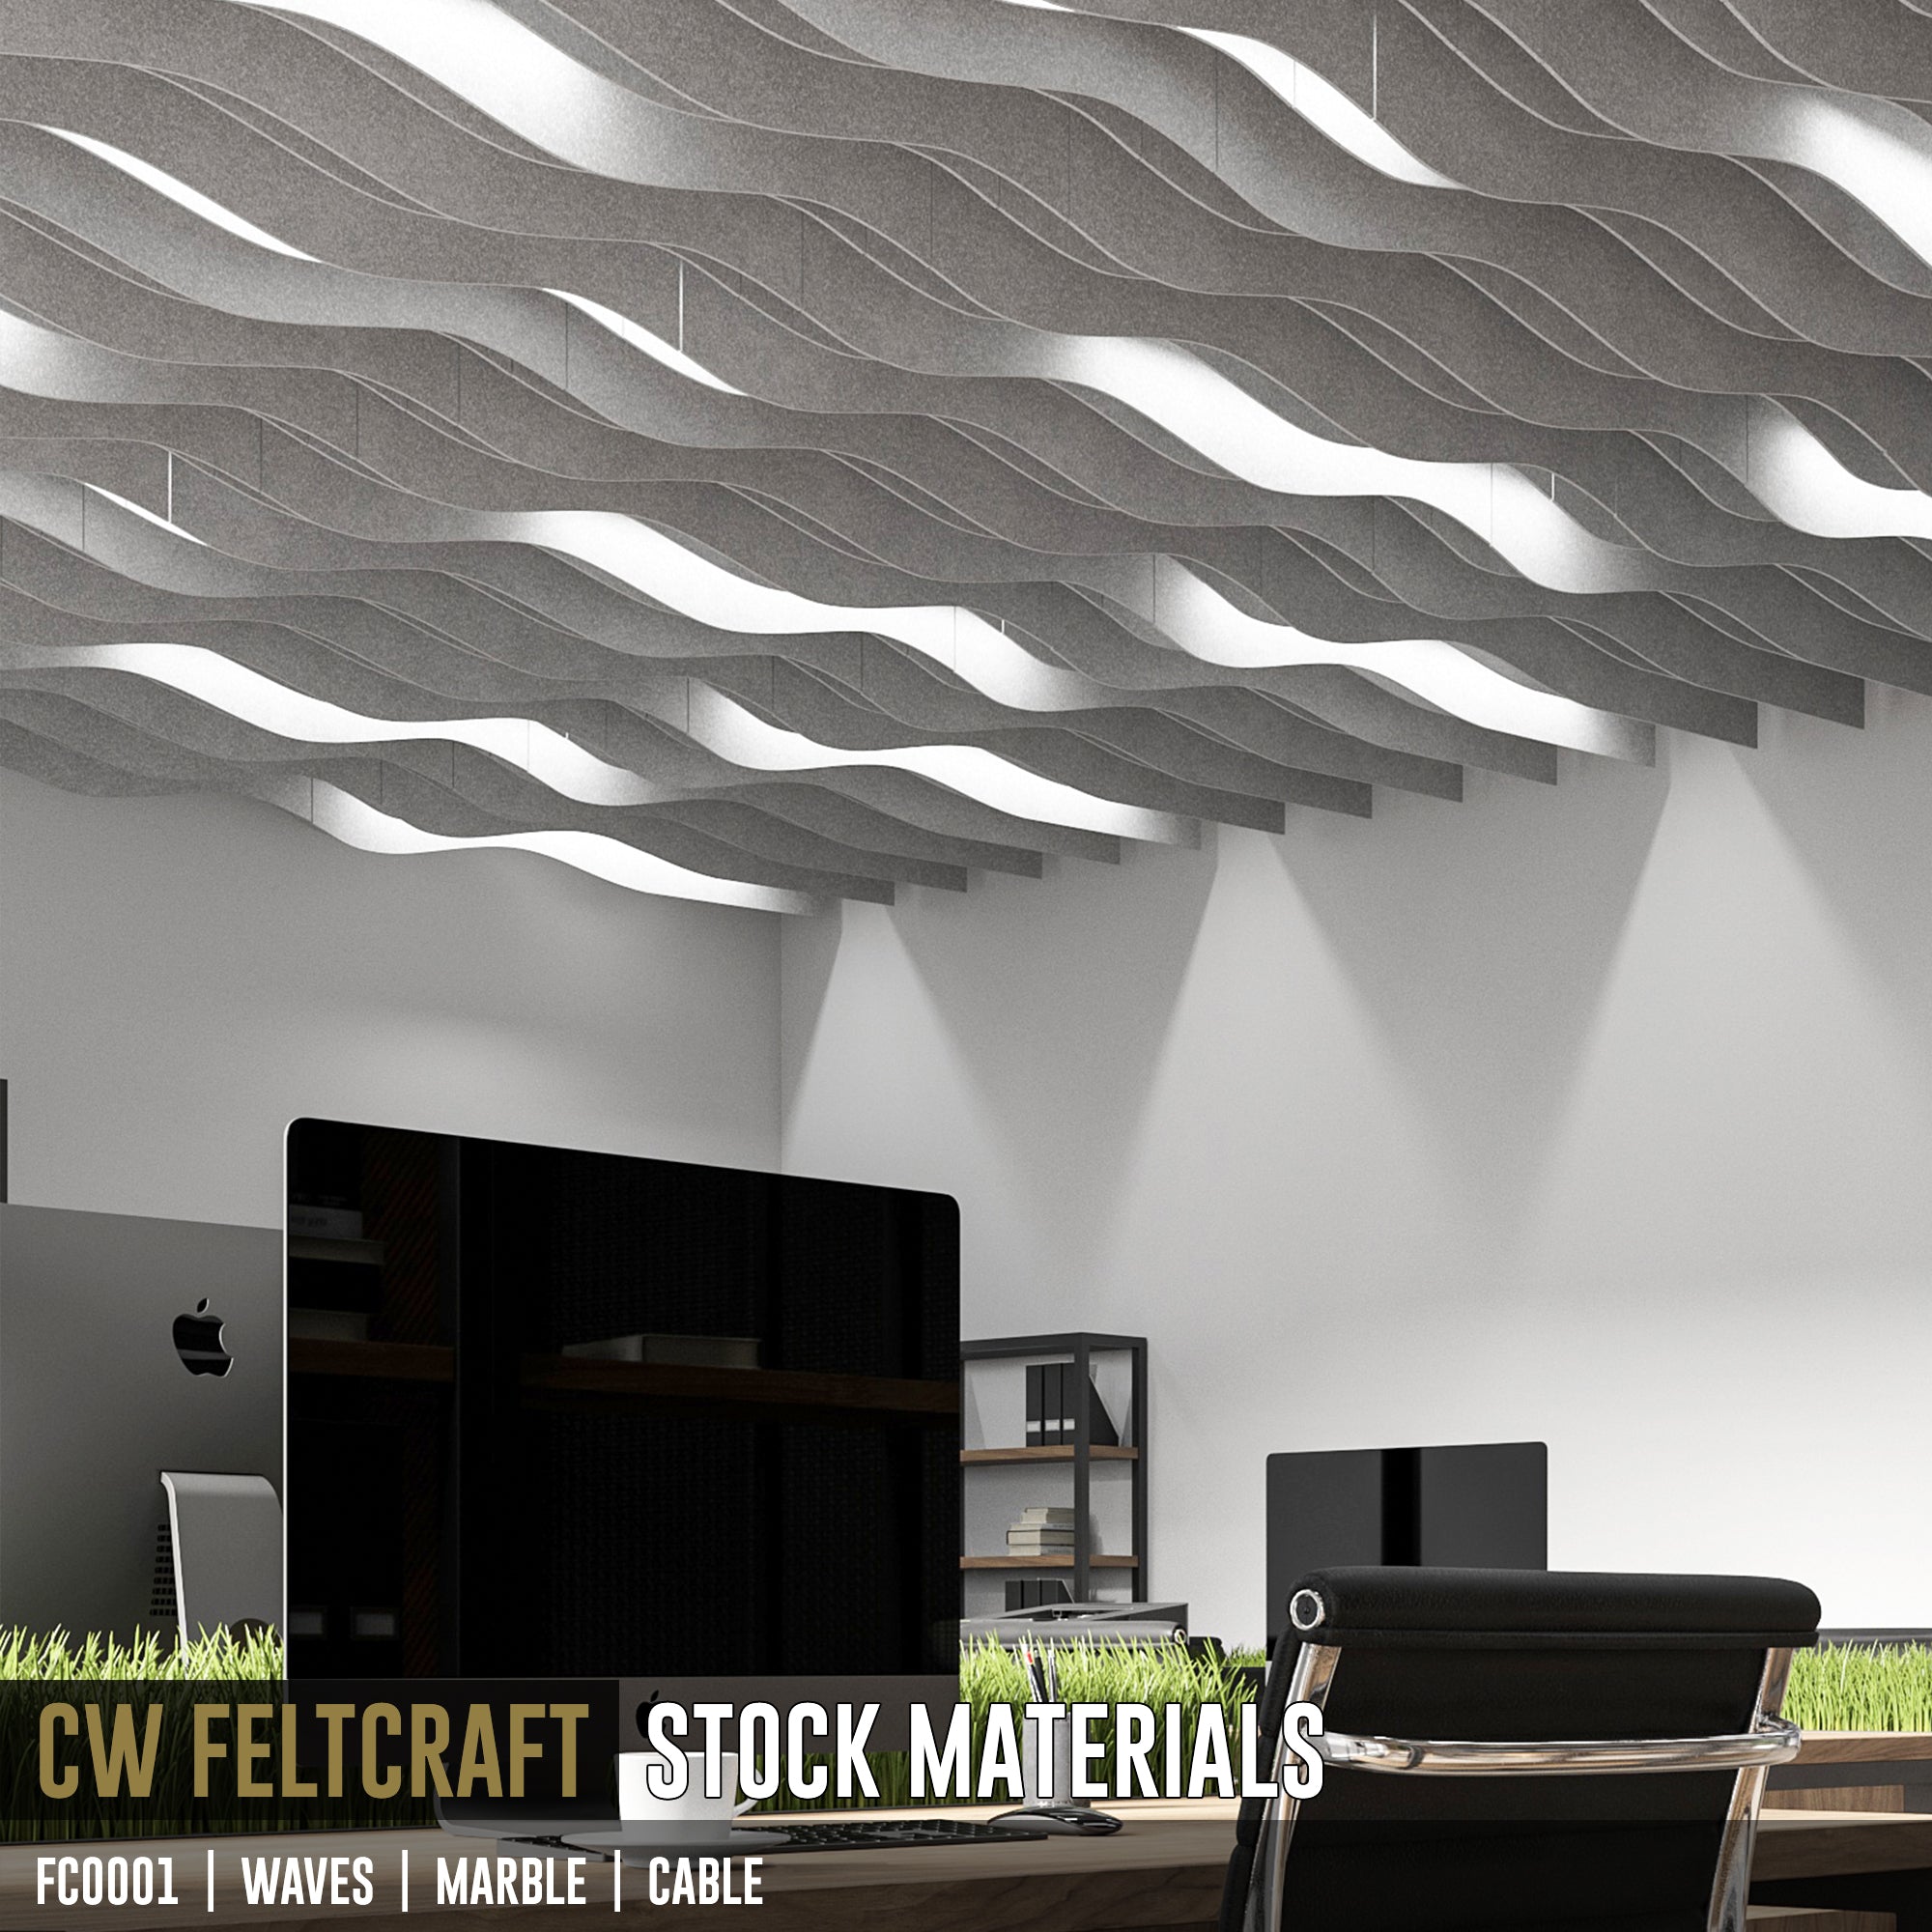 FC0001 | Koi Fish or Waves | Suspended Acoustical Ceiling Baffles System